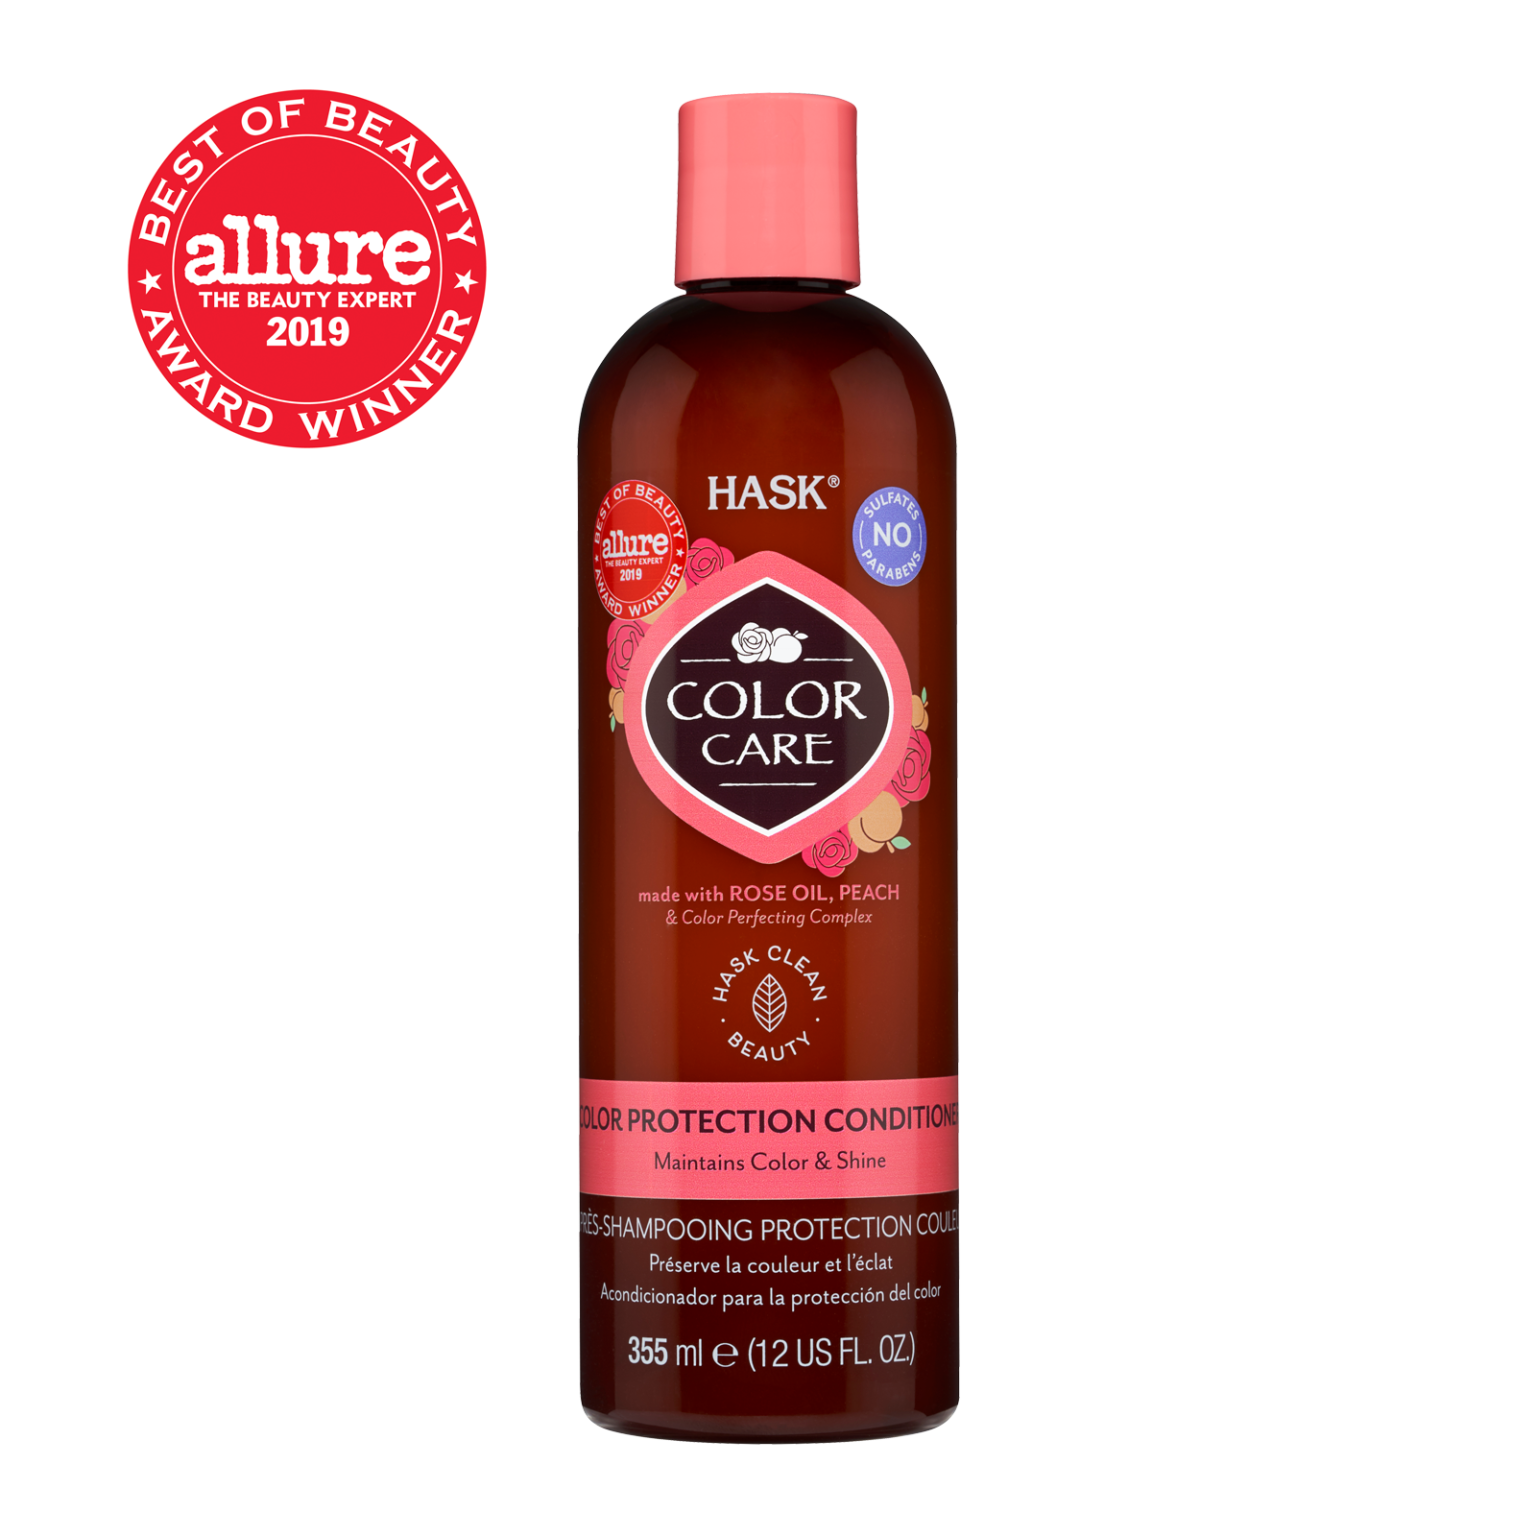 Hask_ColorCare_Conditioner_1600x1600-1536x1536